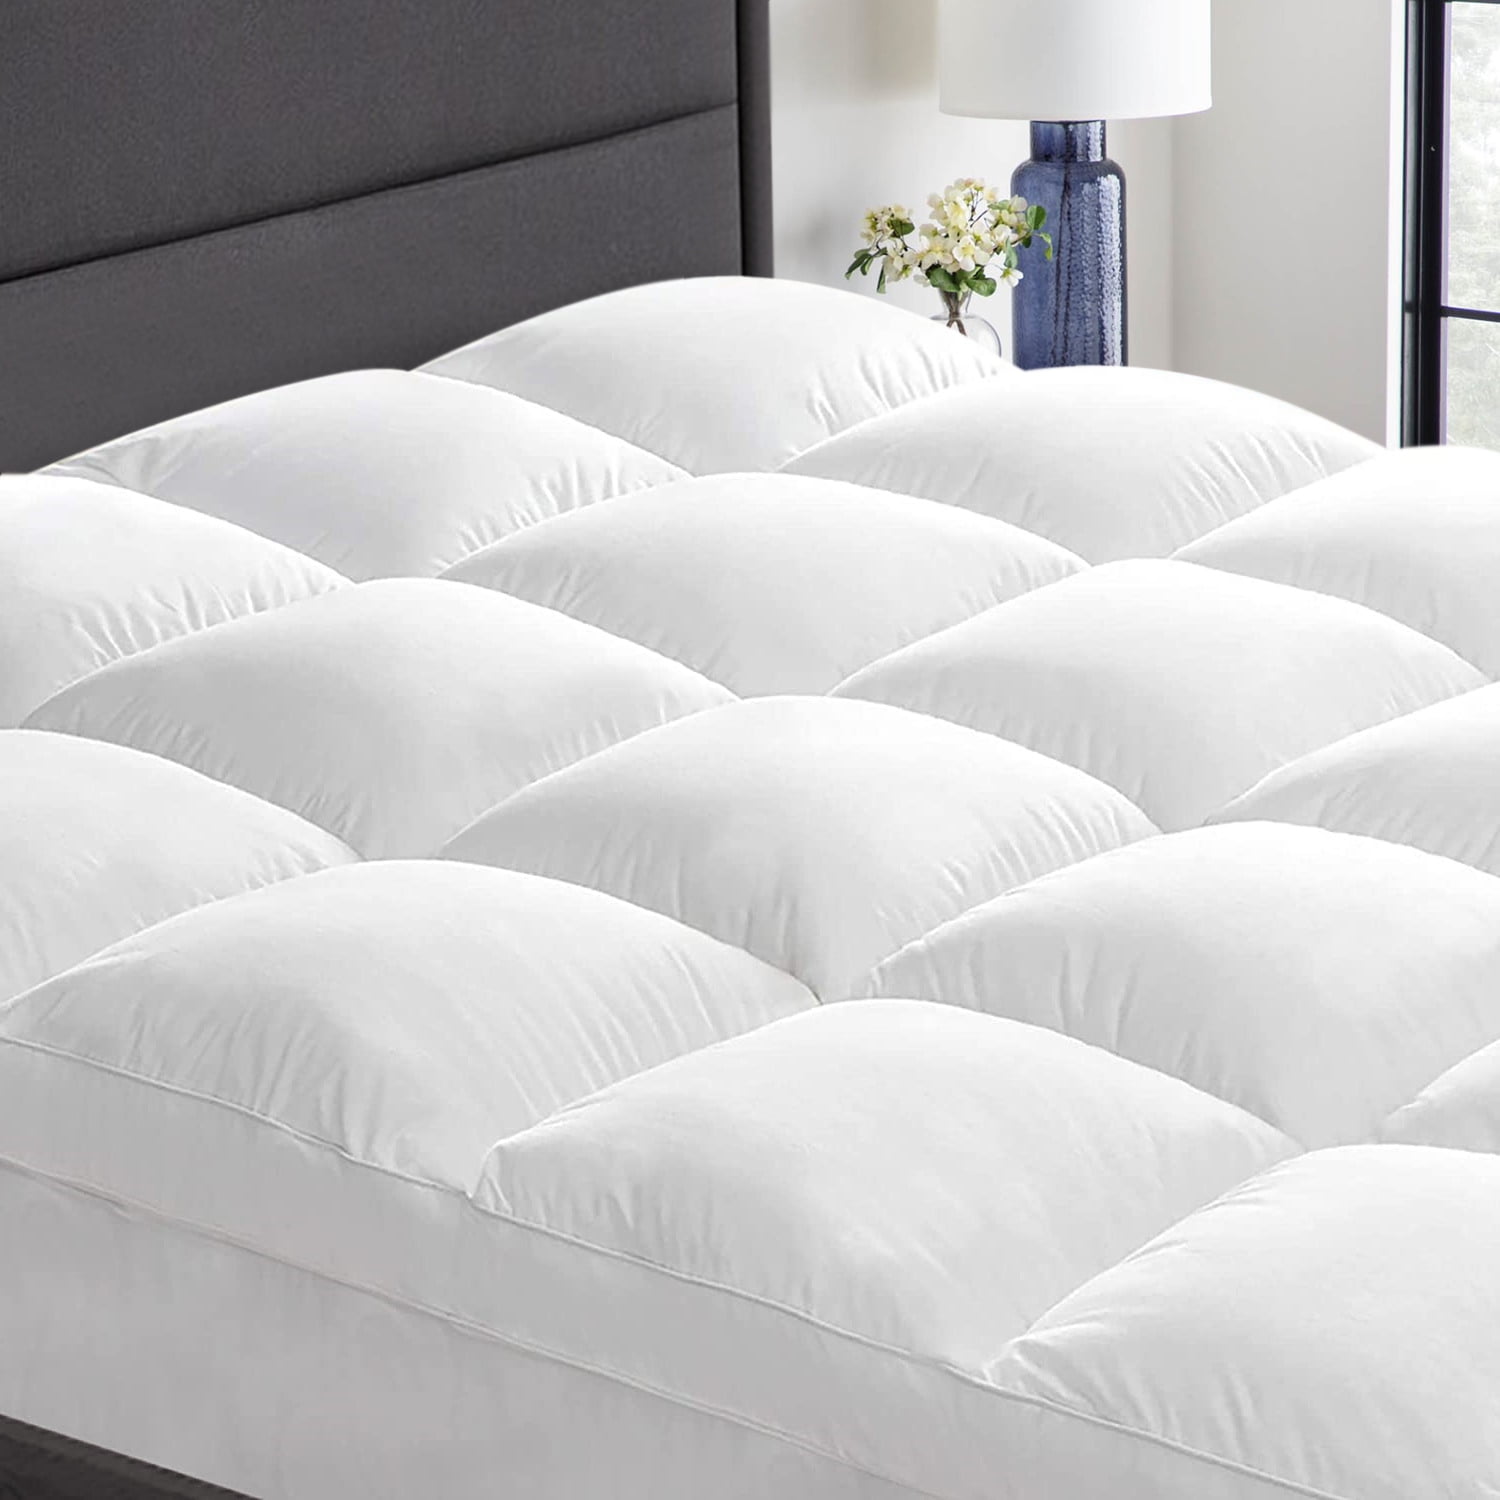 Plush Quilted Pillow Top with Down Alter Mattress-Topper Queen Pure Cotton Top 